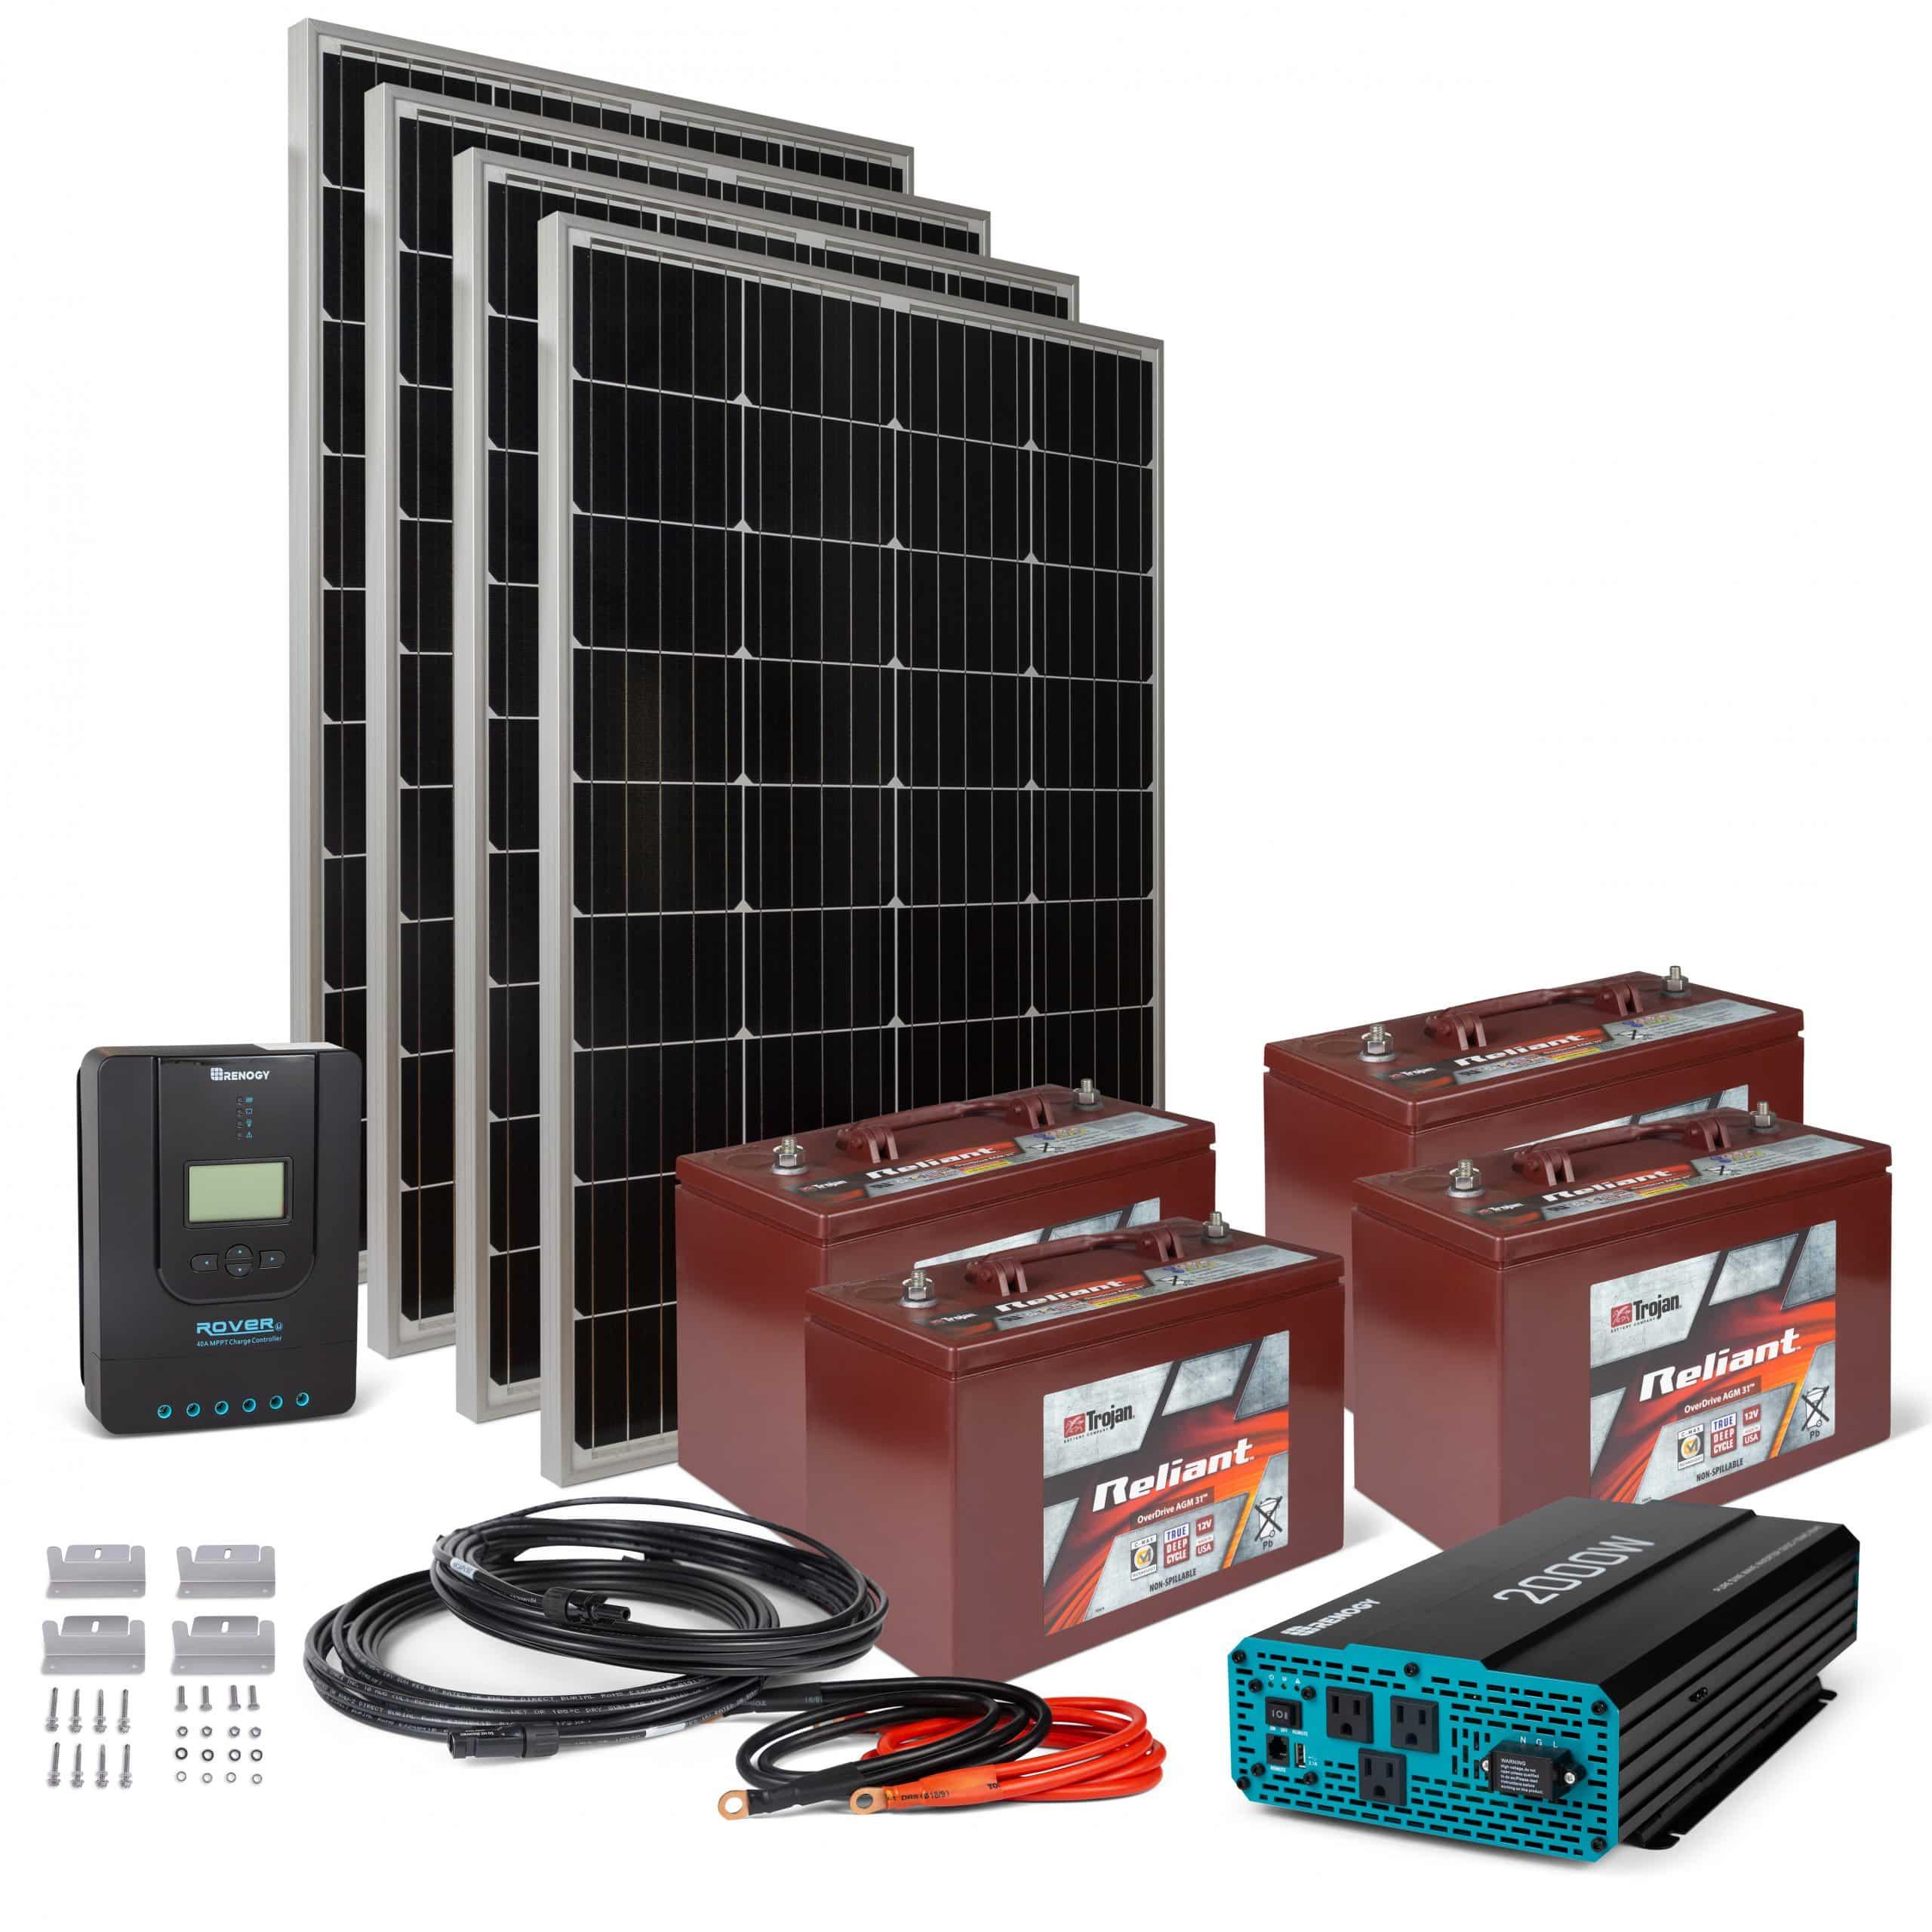 Product Adventurer 1200 Off-Grid Solar Kit for Cabins, Homes, RVs, Outdoors 305W 12V image